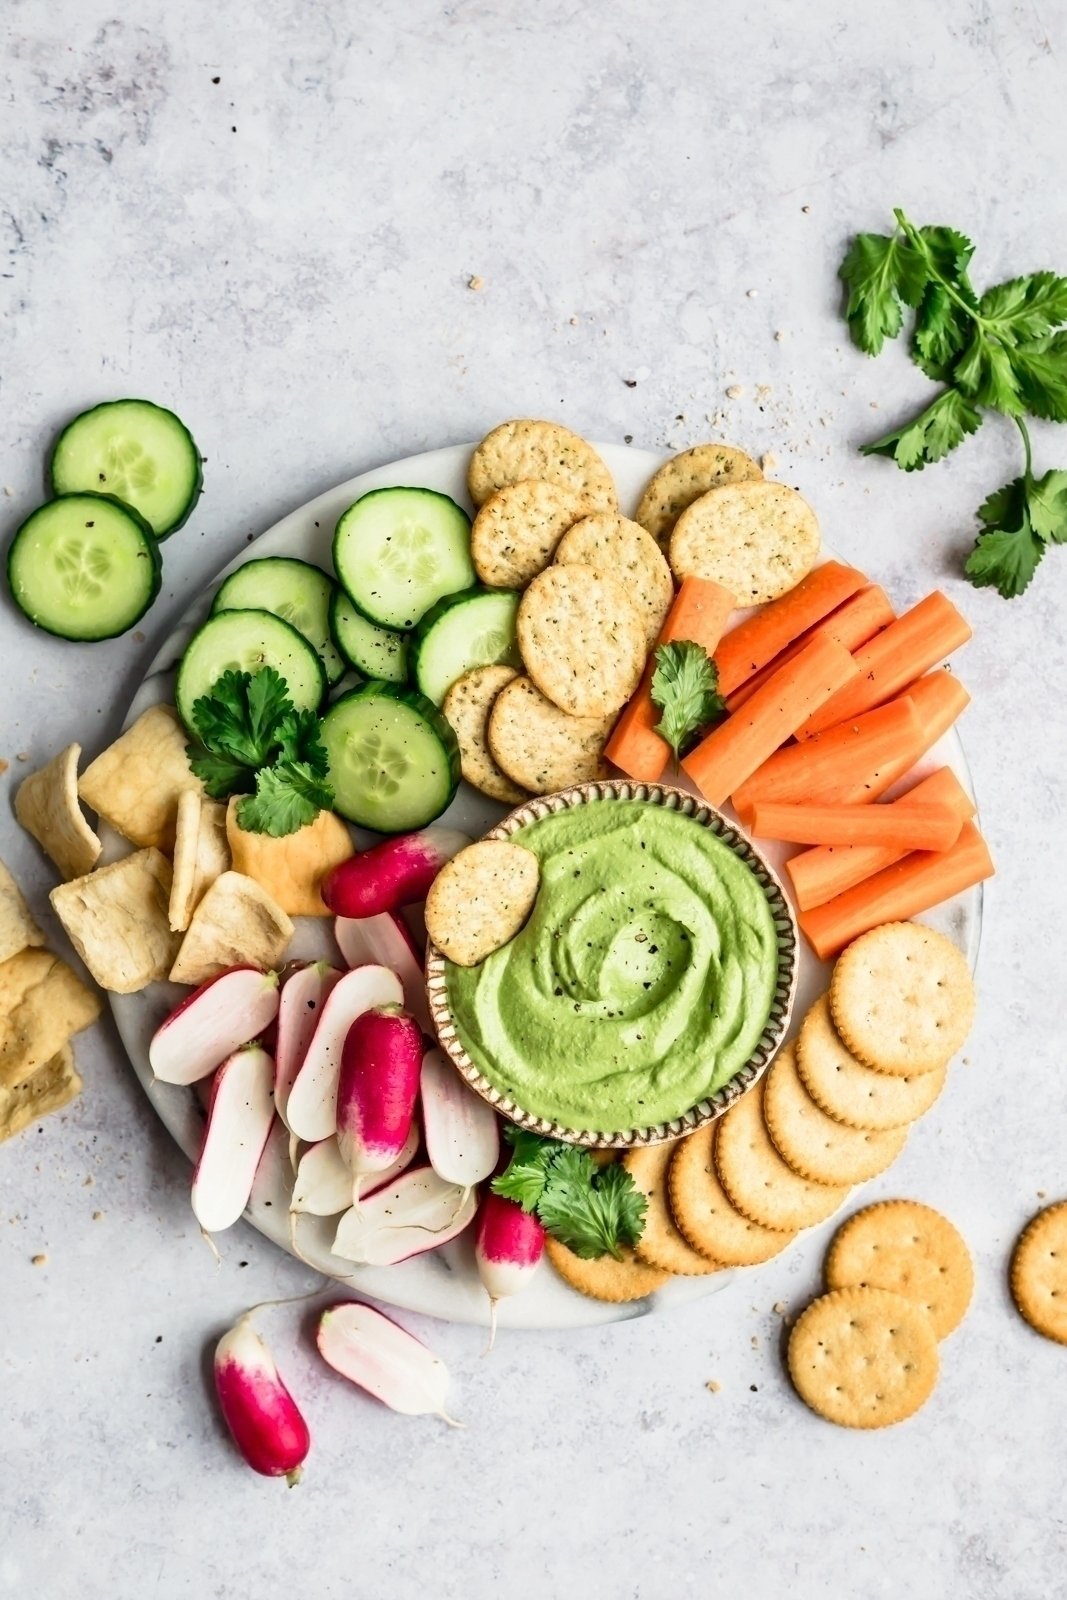 spicy green vegan cashew dip on a platter with veggies and crackers